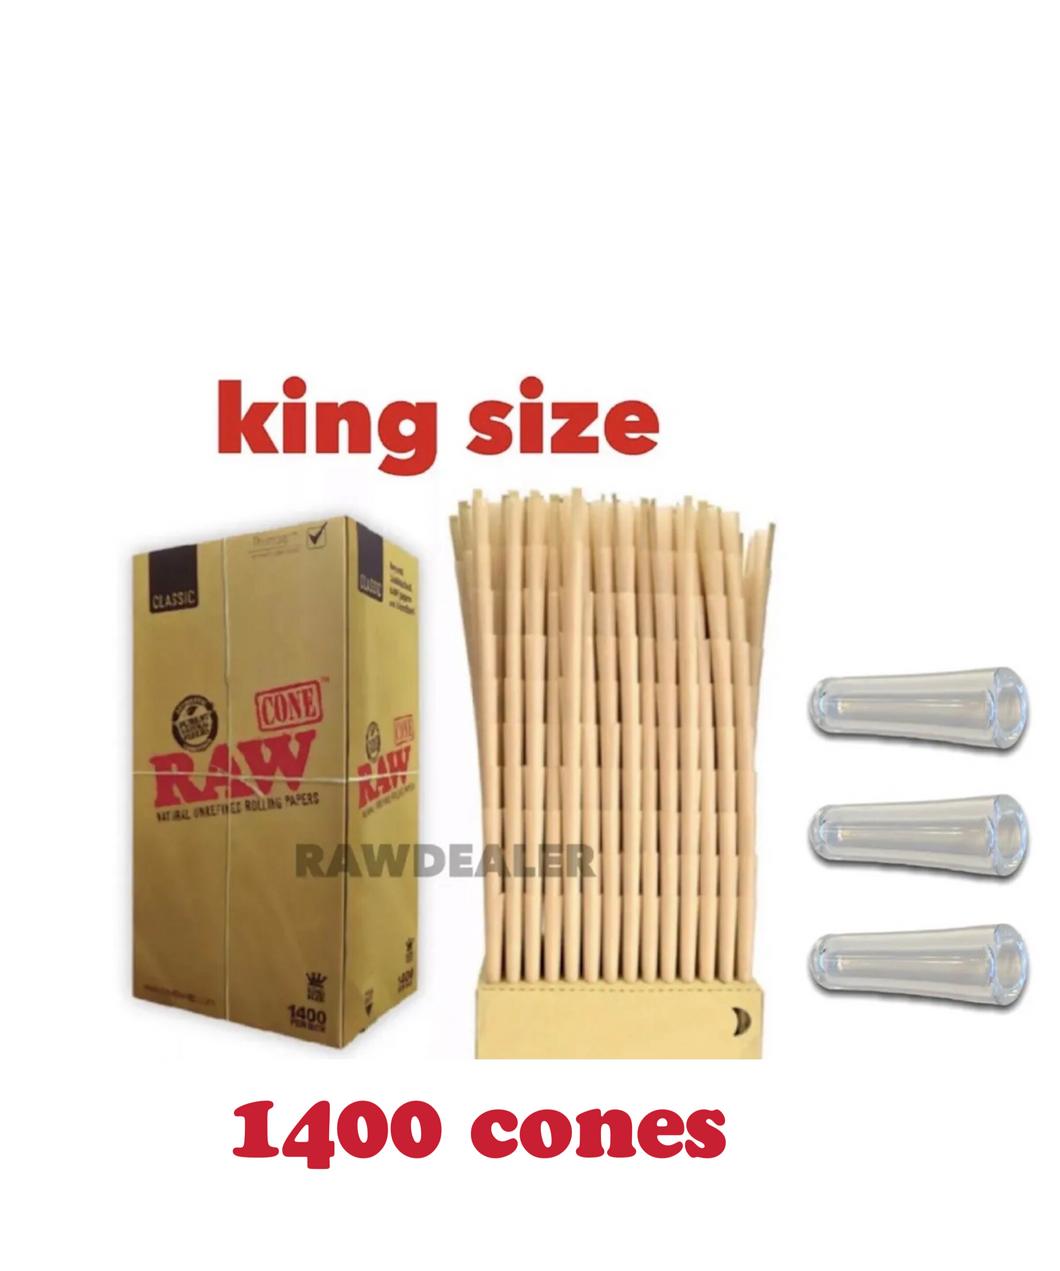 RAW classic king size pre rolled cone 1400 pack FULL BOX+3 glass cone holder tip